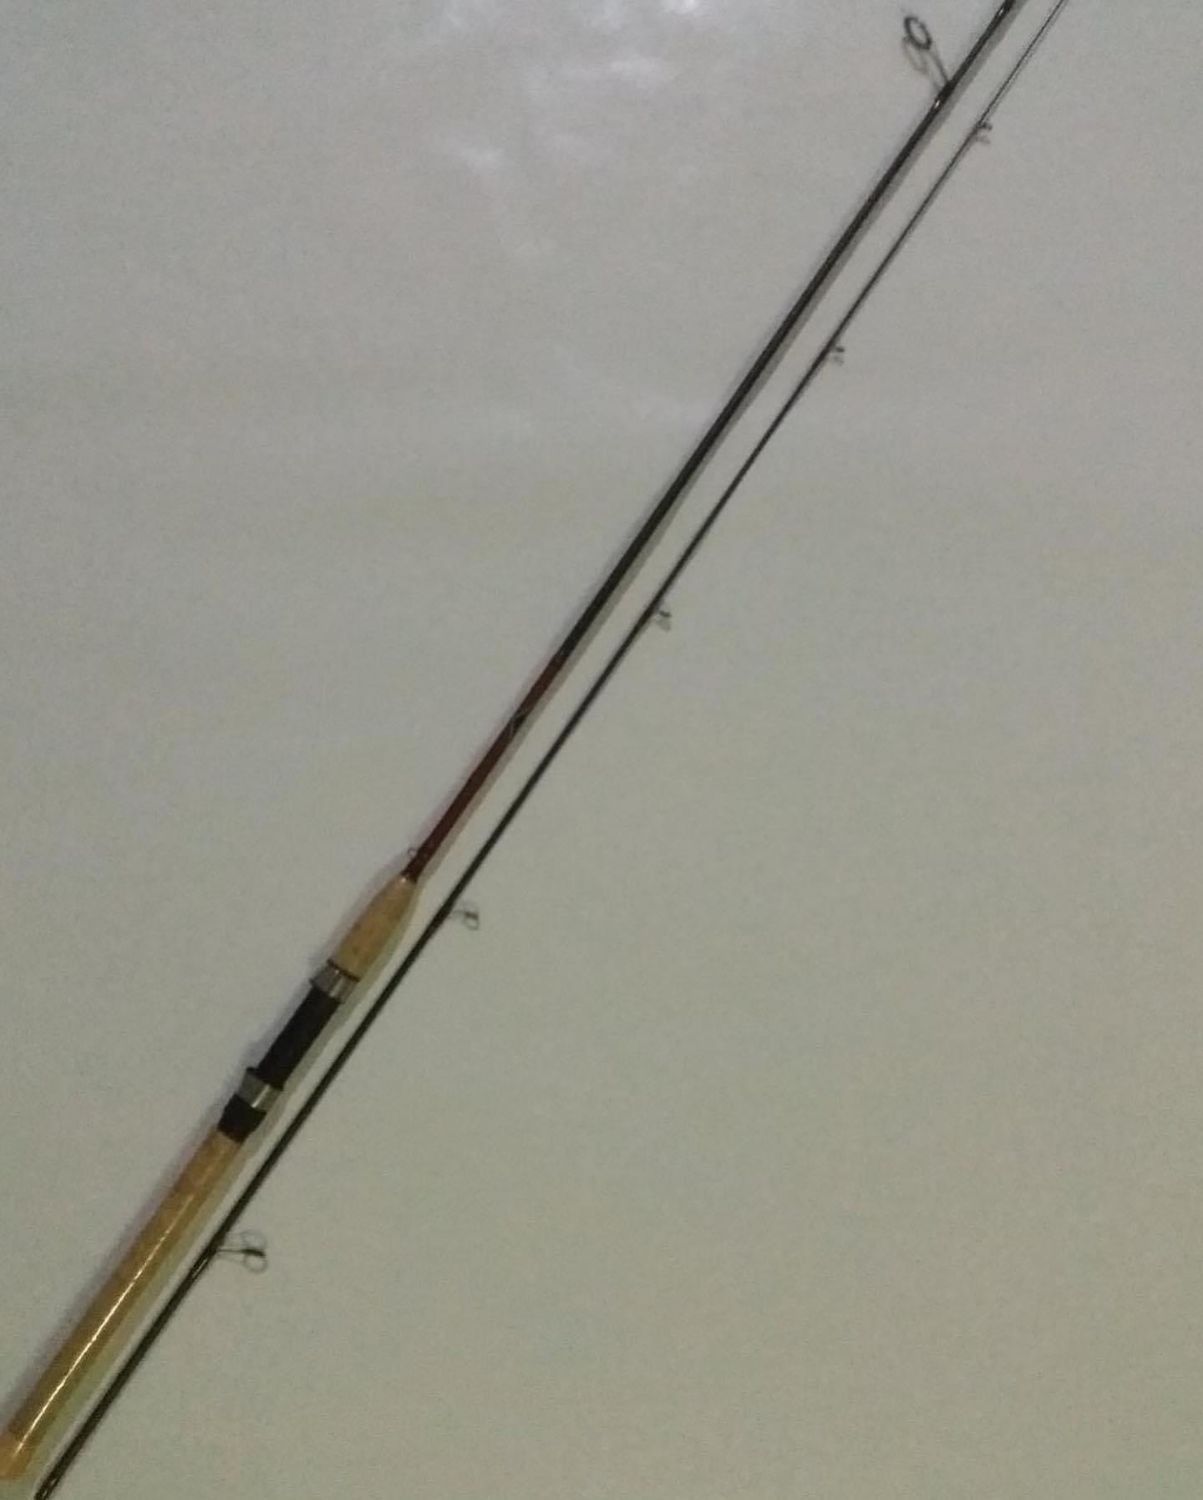 Shimano Catana Carbon Fiber Spinning Rod 2.10 m Test 2-8 grams - Wholesale  Store of Fishing Tackles